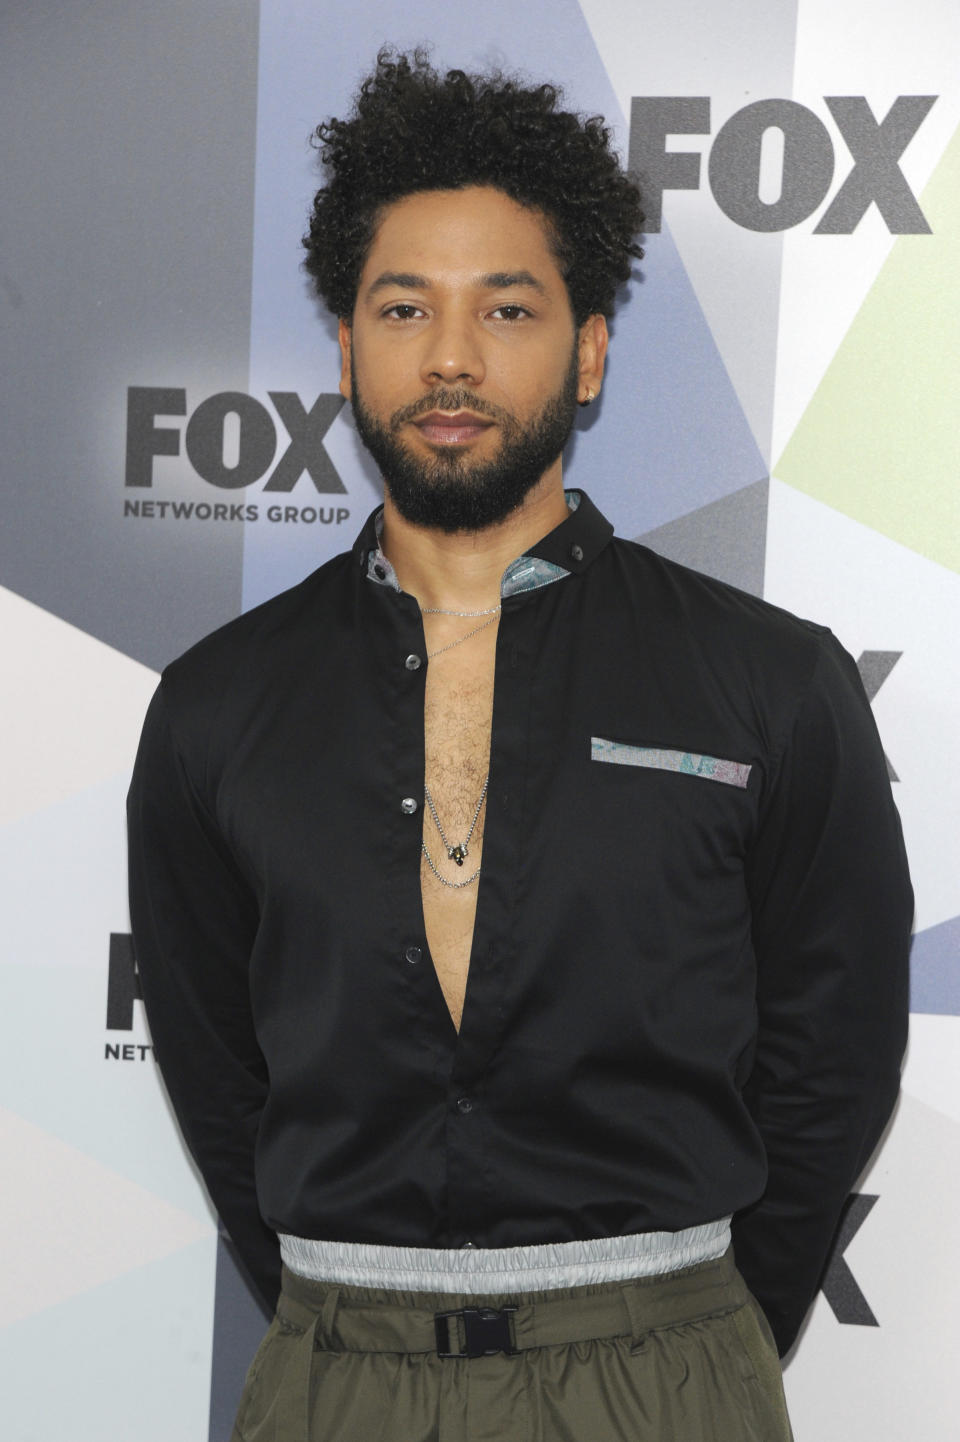 Chicago police confirmed that the trajectory of their investigation into the alleged attack on <a href="https://www.huffingtonpost.com/topic/jussie-smollett" target="_blank" rel="noopener noreferrer">Jussie Smollett</a> has &ldquo;shifted." (Photo: John Palmer/MediaPunch/IPx)